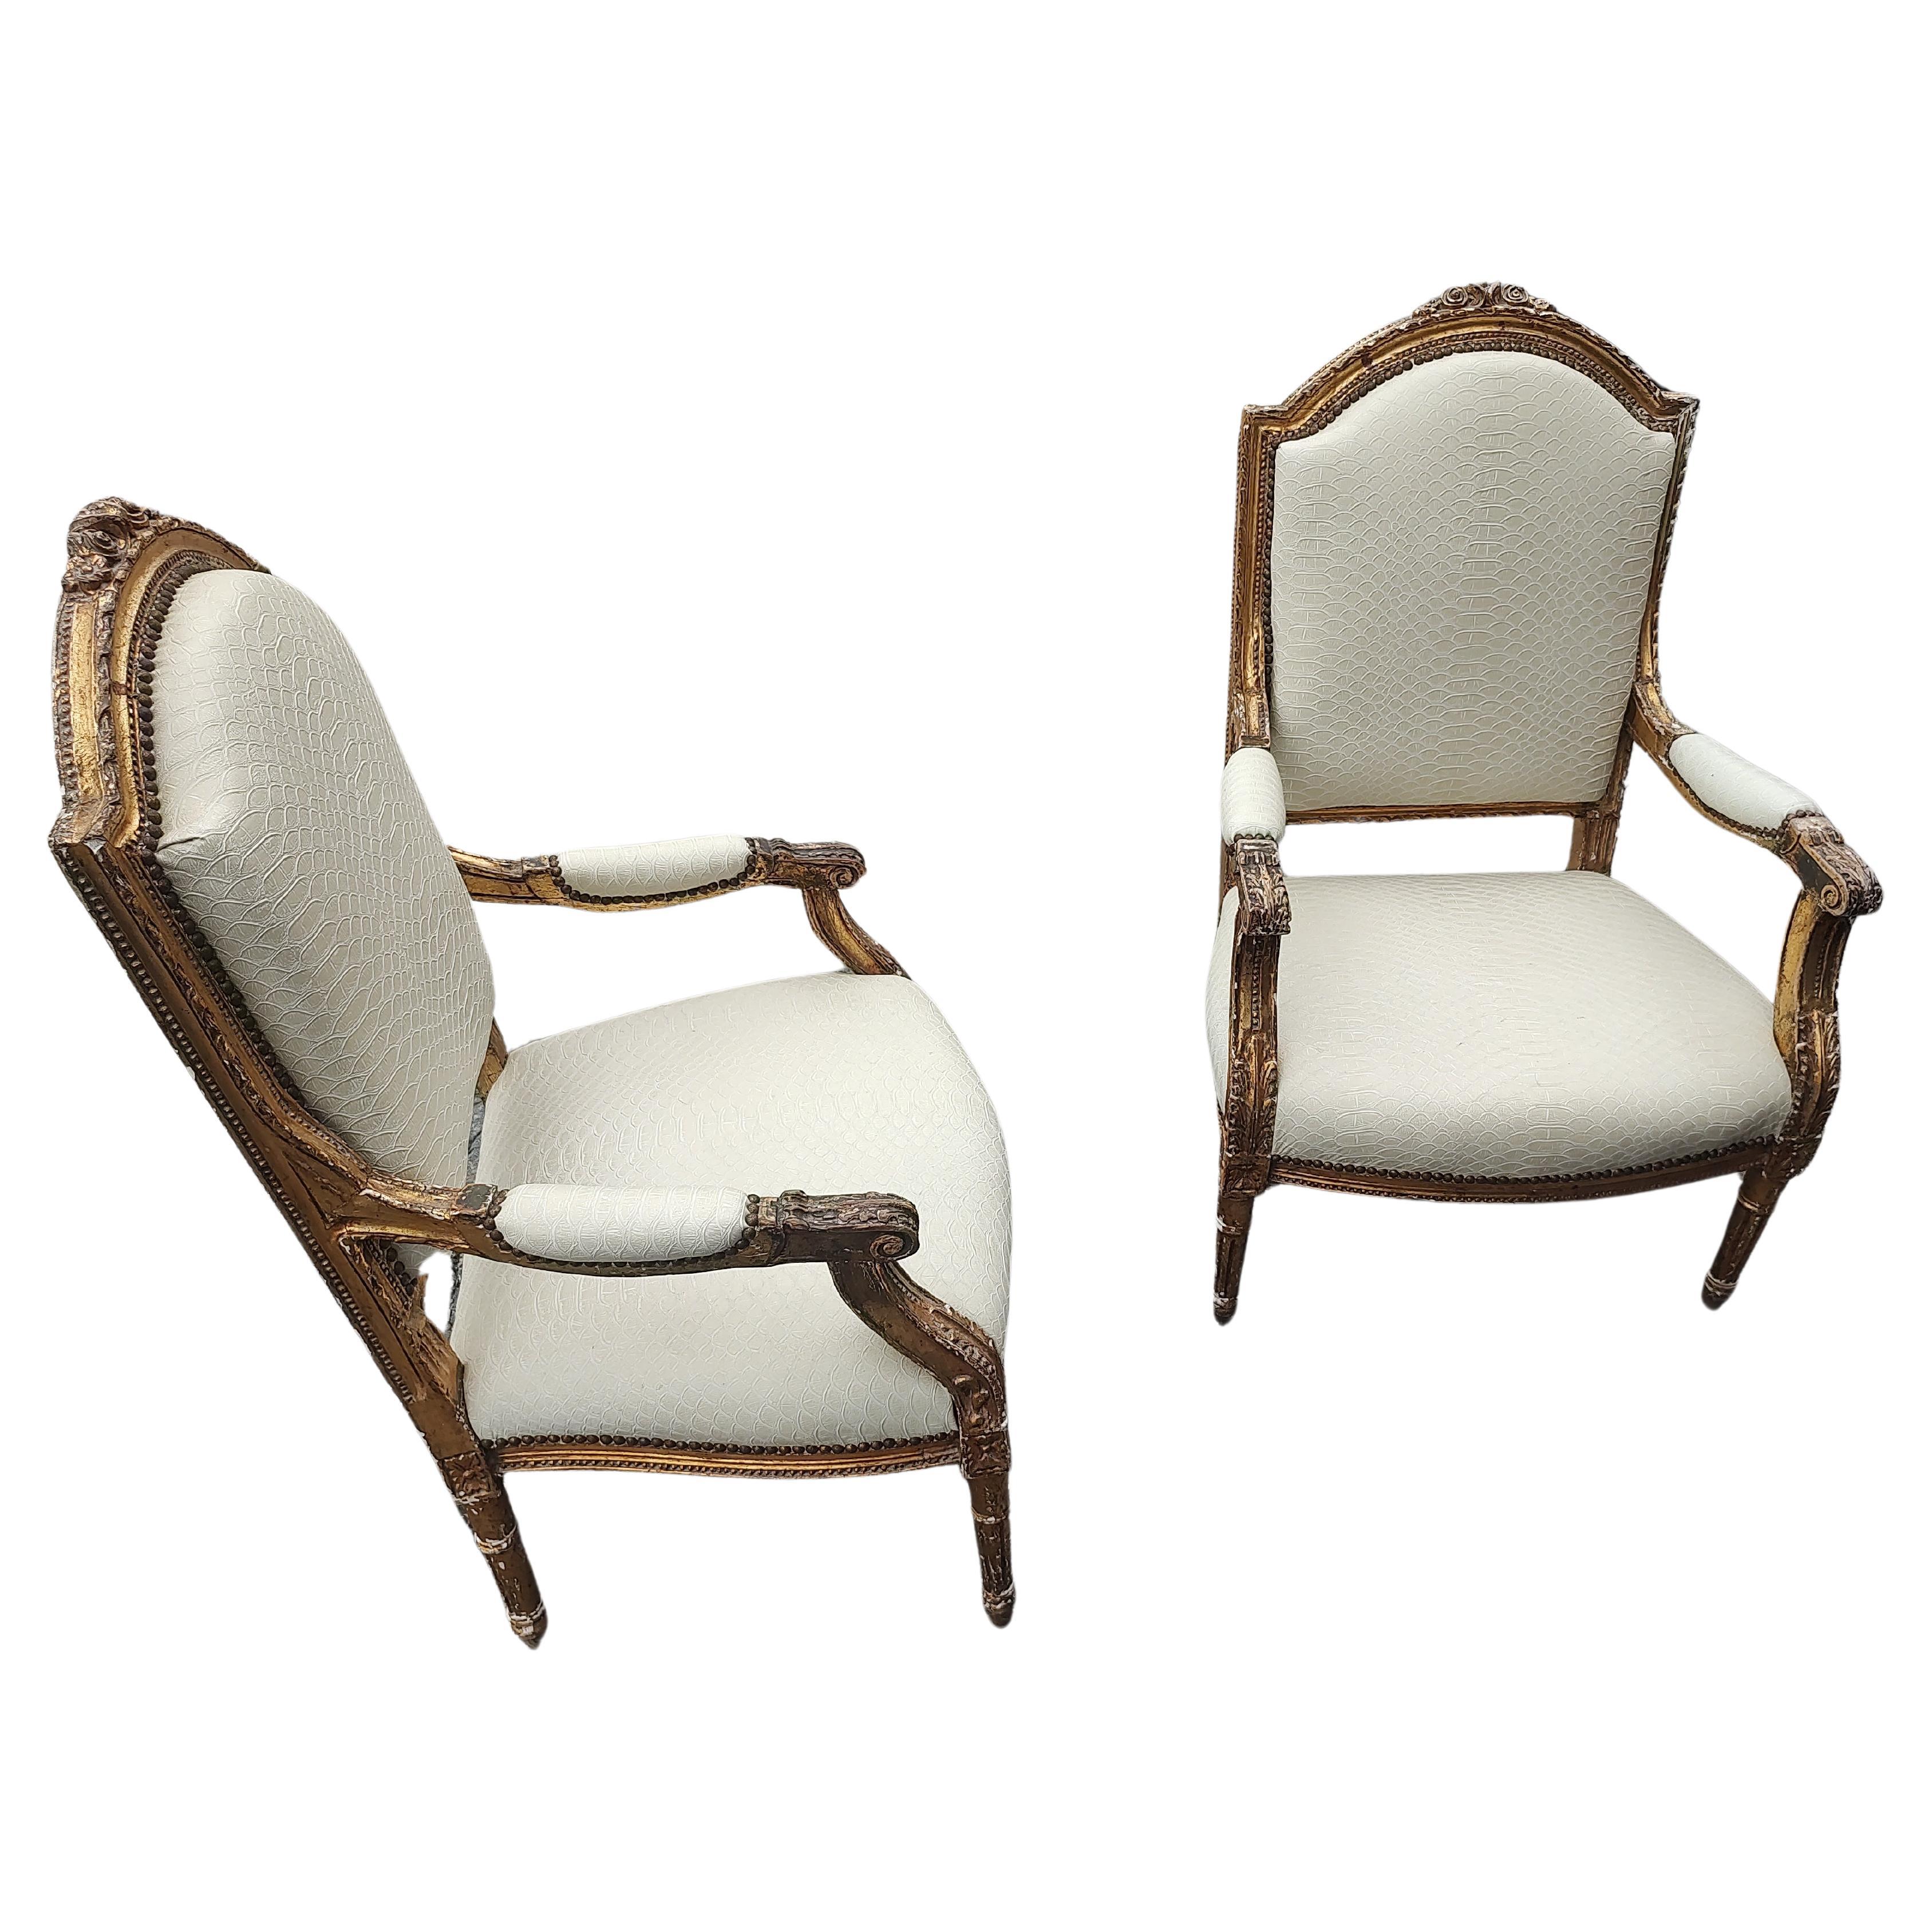 Pair of Mid 18th Century Gilt French Armchairs Fauteuils For Sale 4